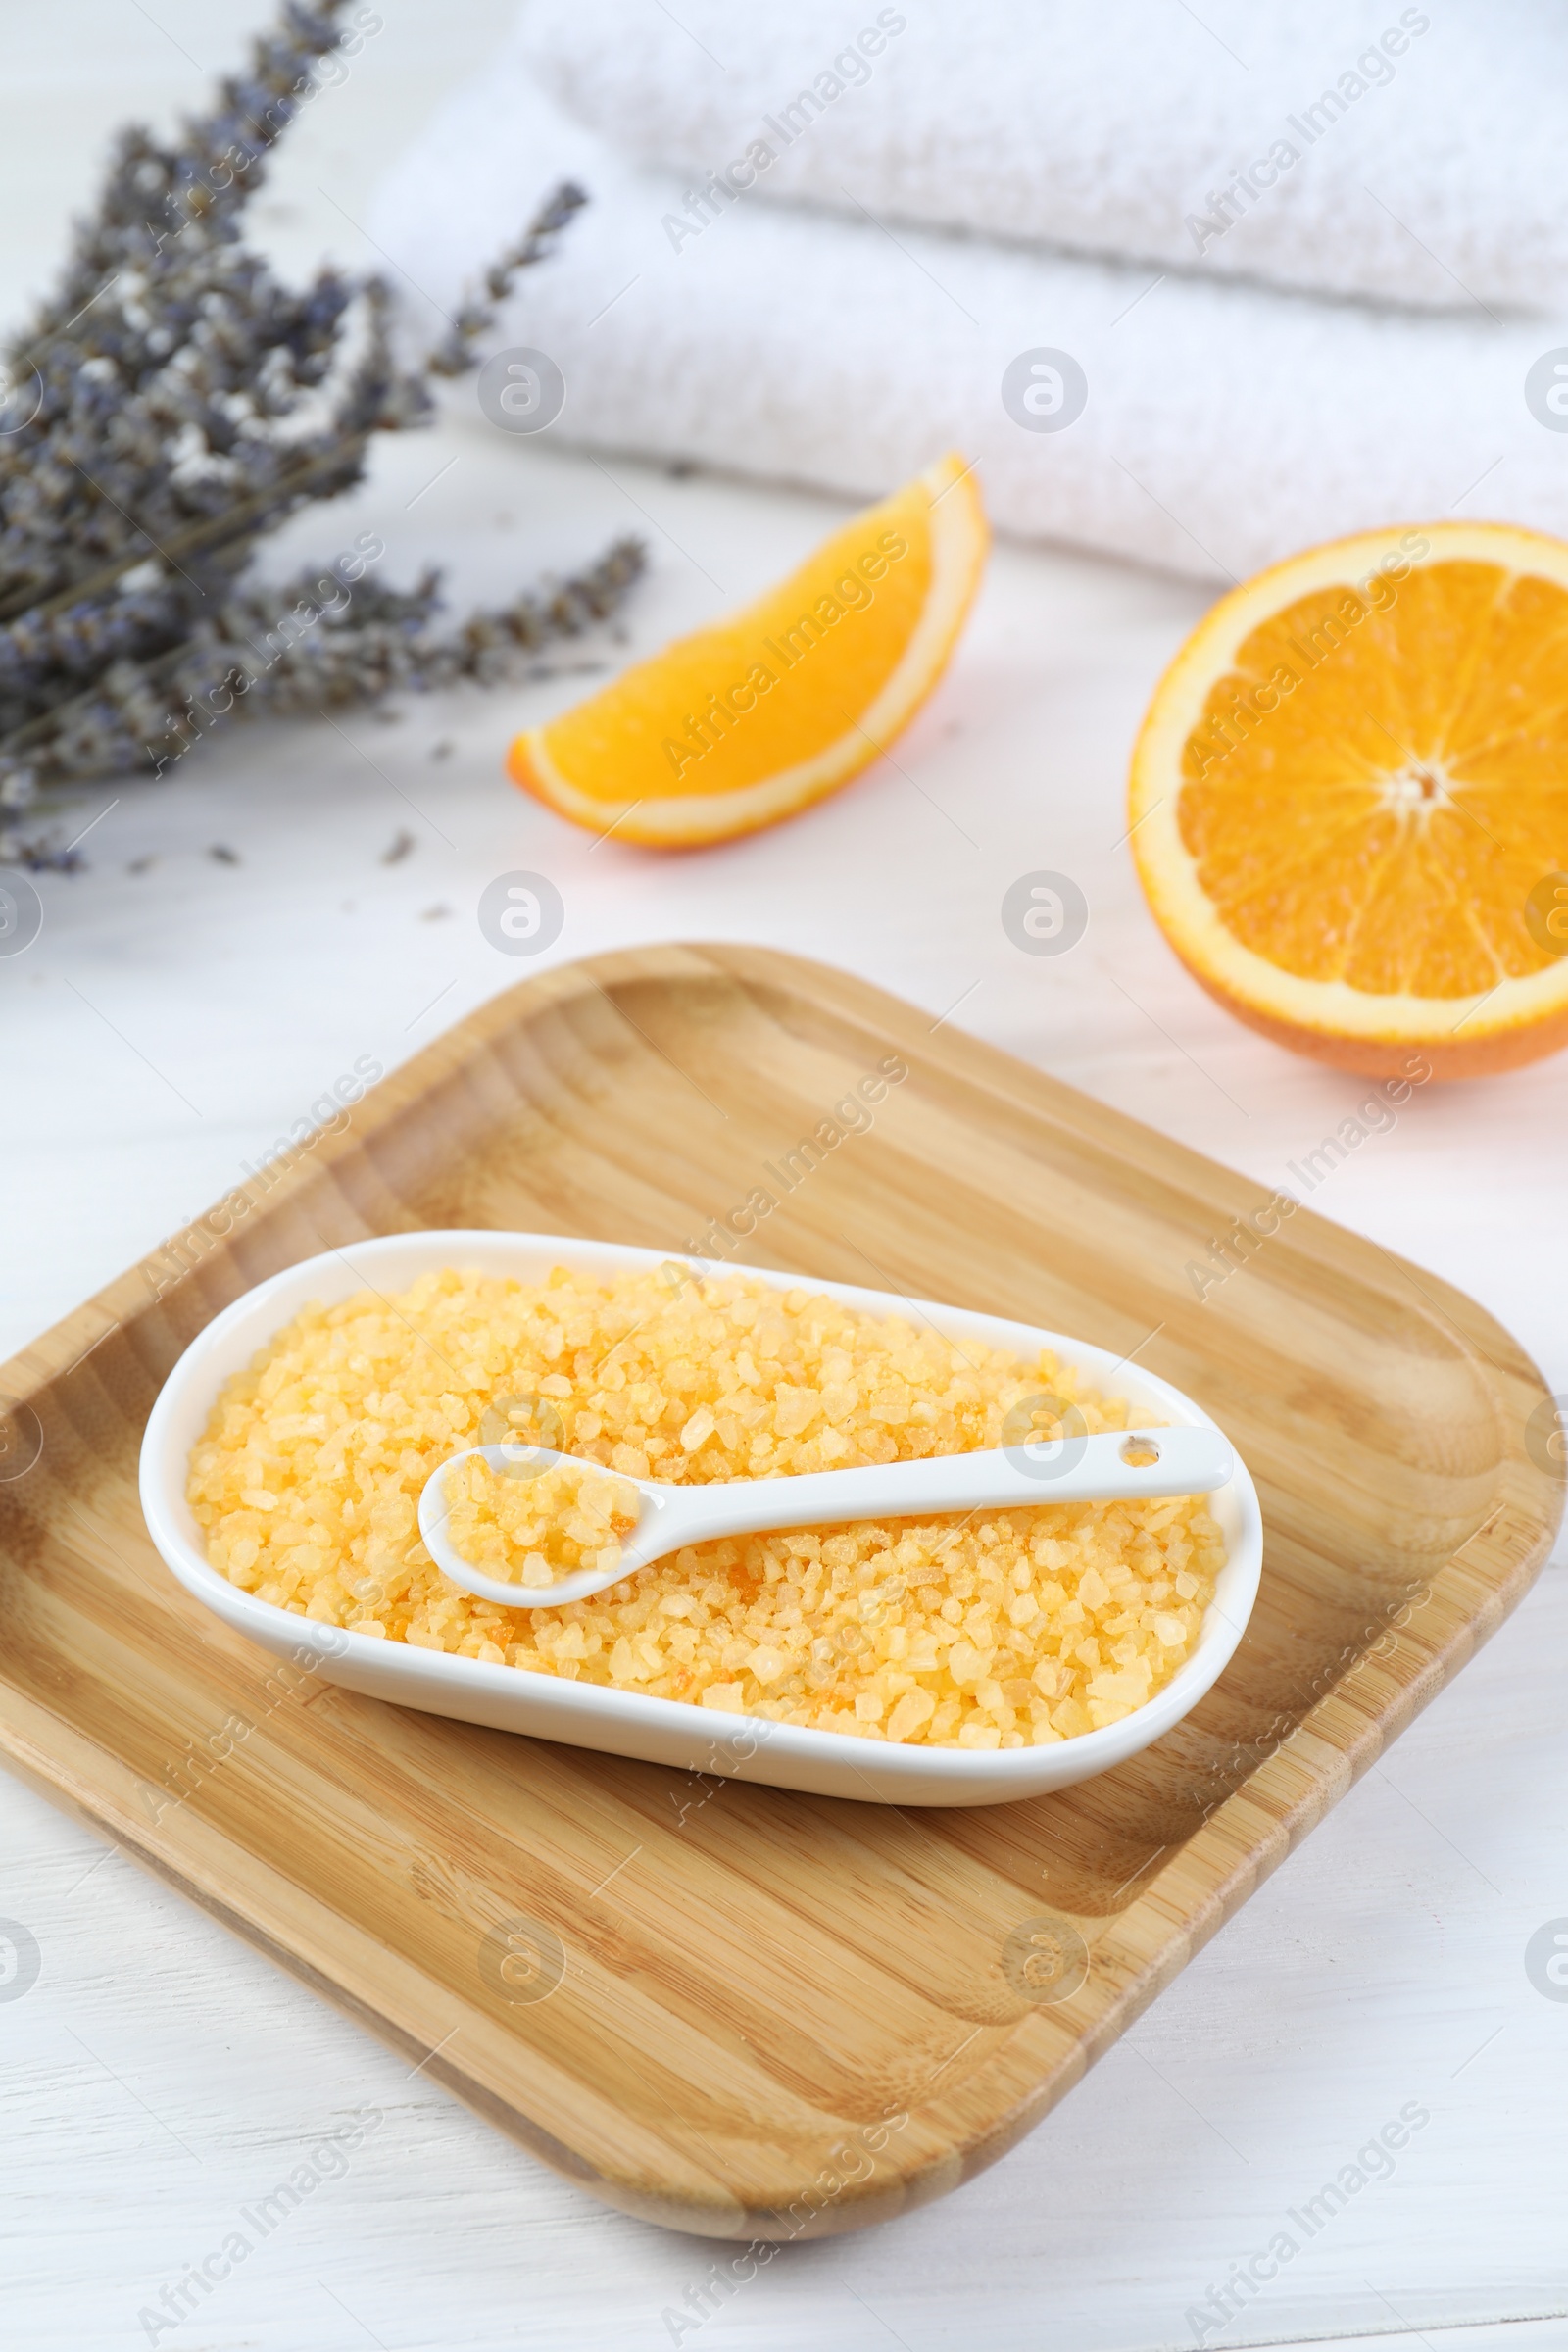 Photo of Sea salt, lavender, orange and towels on white wooden table